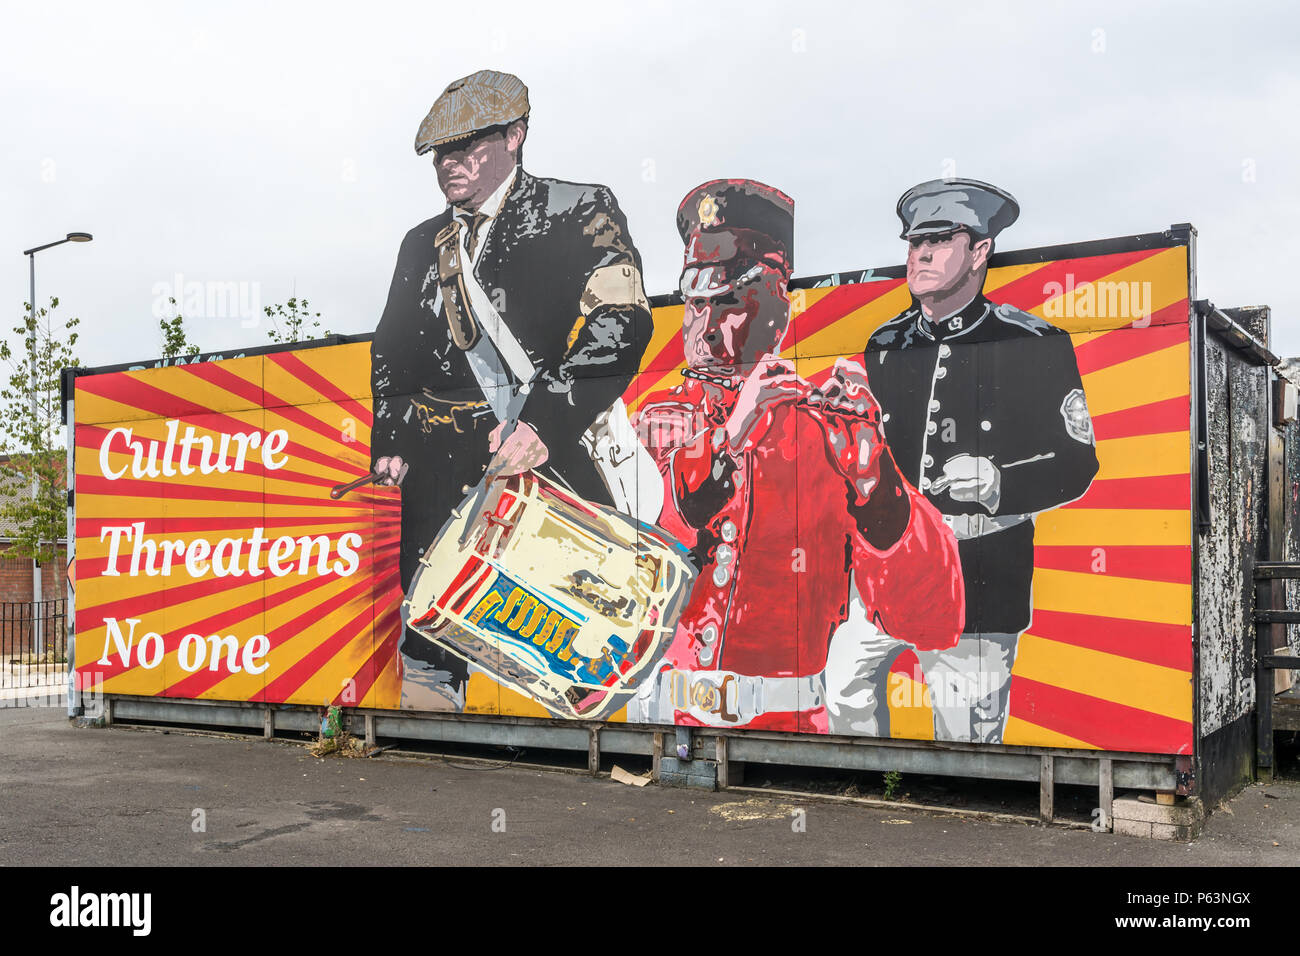 Culture Threatens No One mural in East Belfast Stock Photo